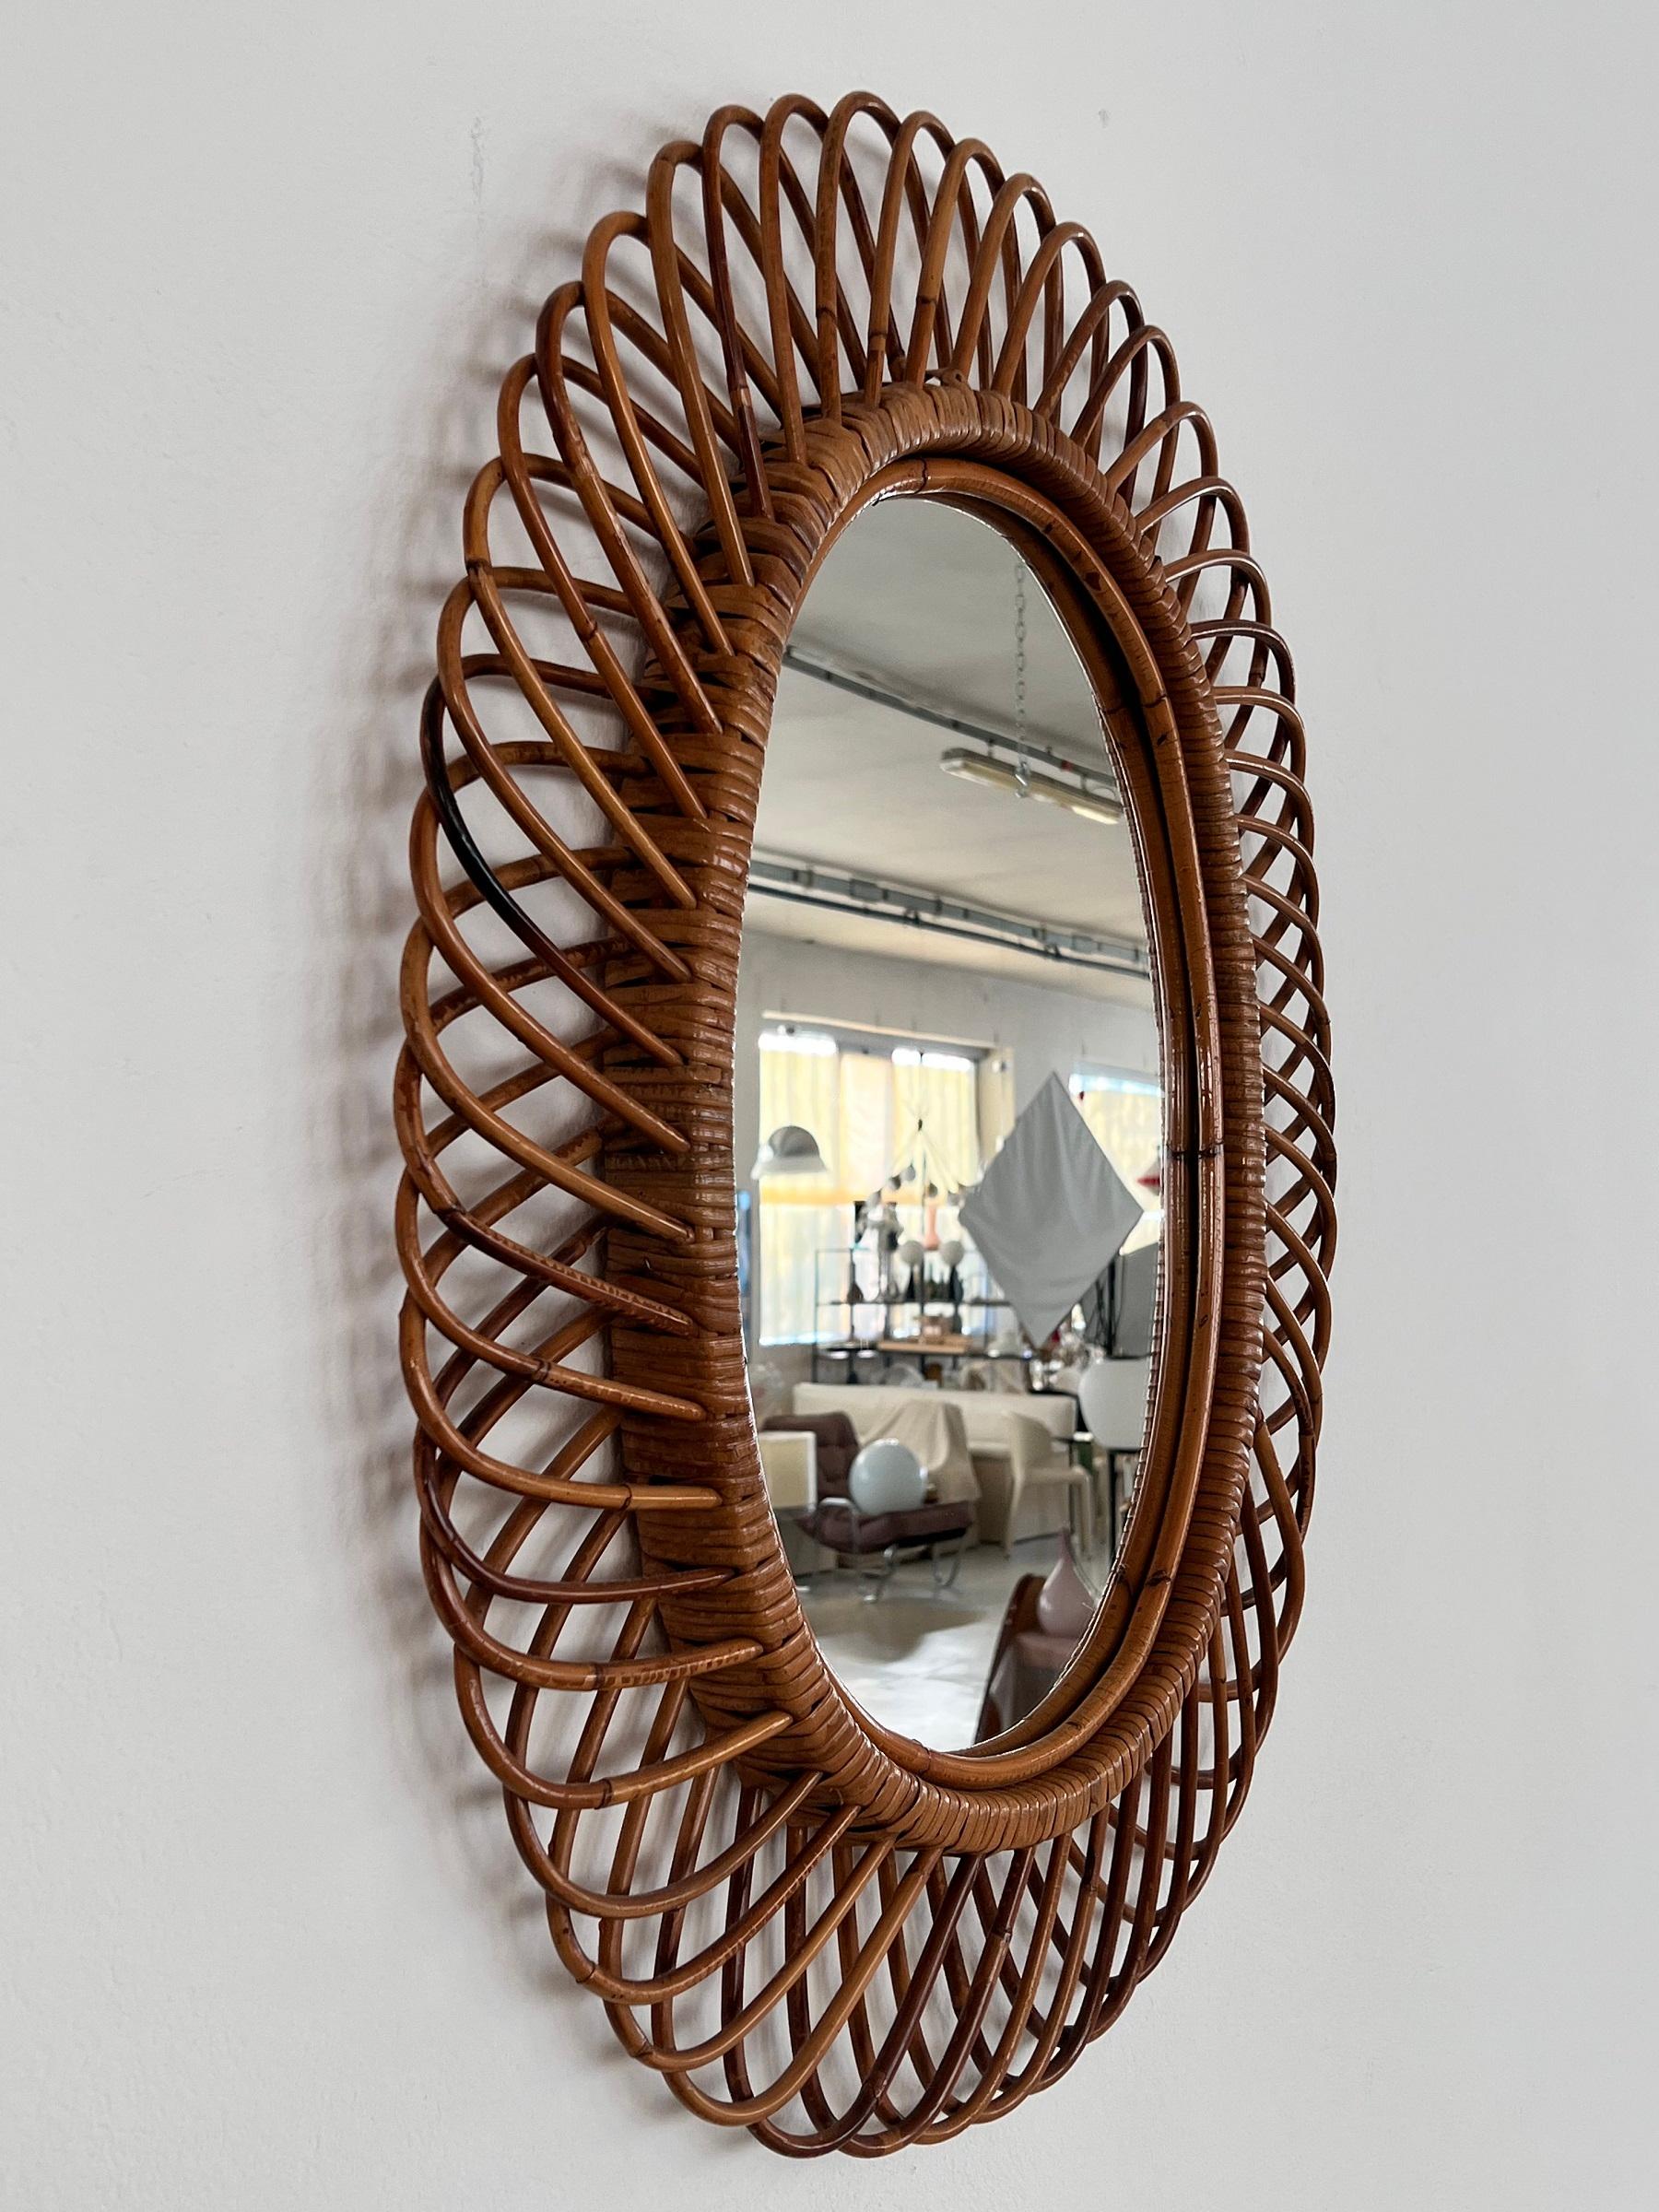 Italian Midcentury Oval Wall Mirror With Bamboo Frame Franco Albini Style, 1960s For Sale 4